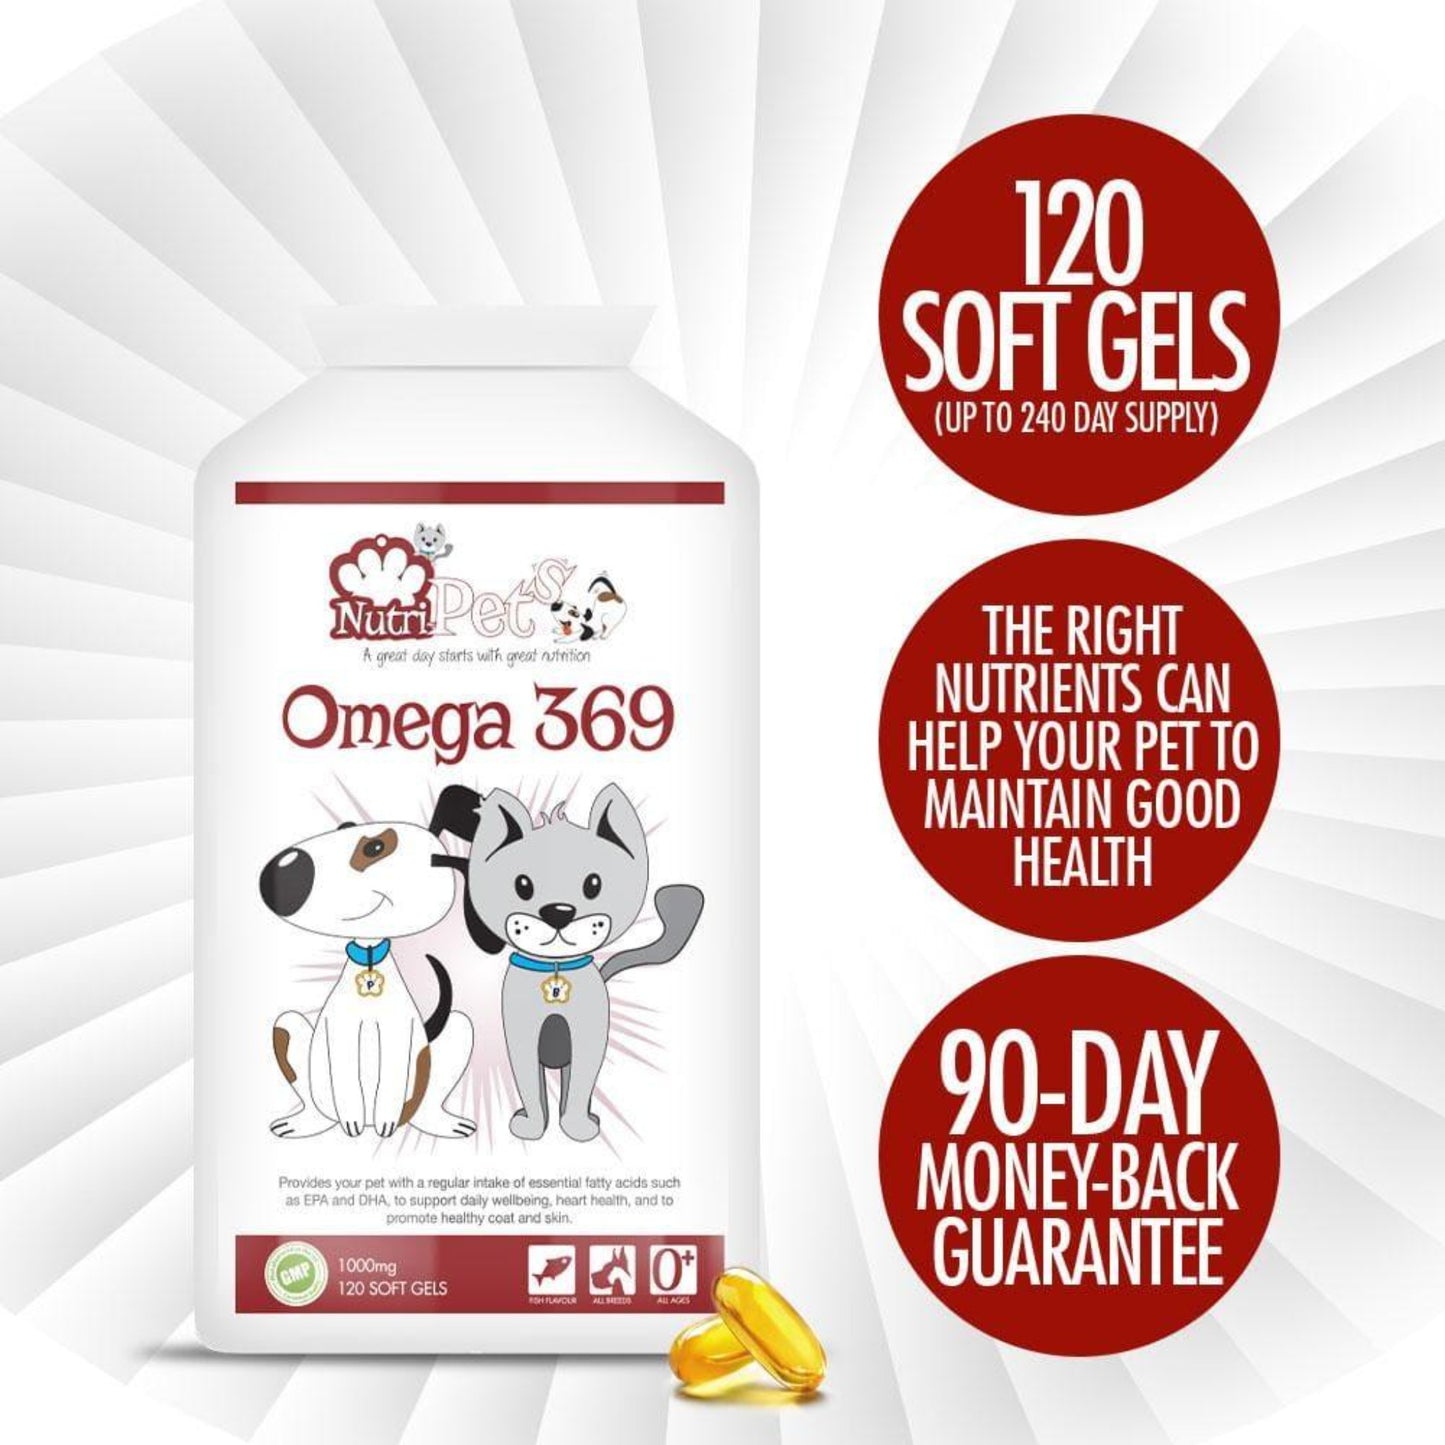 Nutri-Pets Omega 369 contains all the right nutrients to help your pet maintain good health